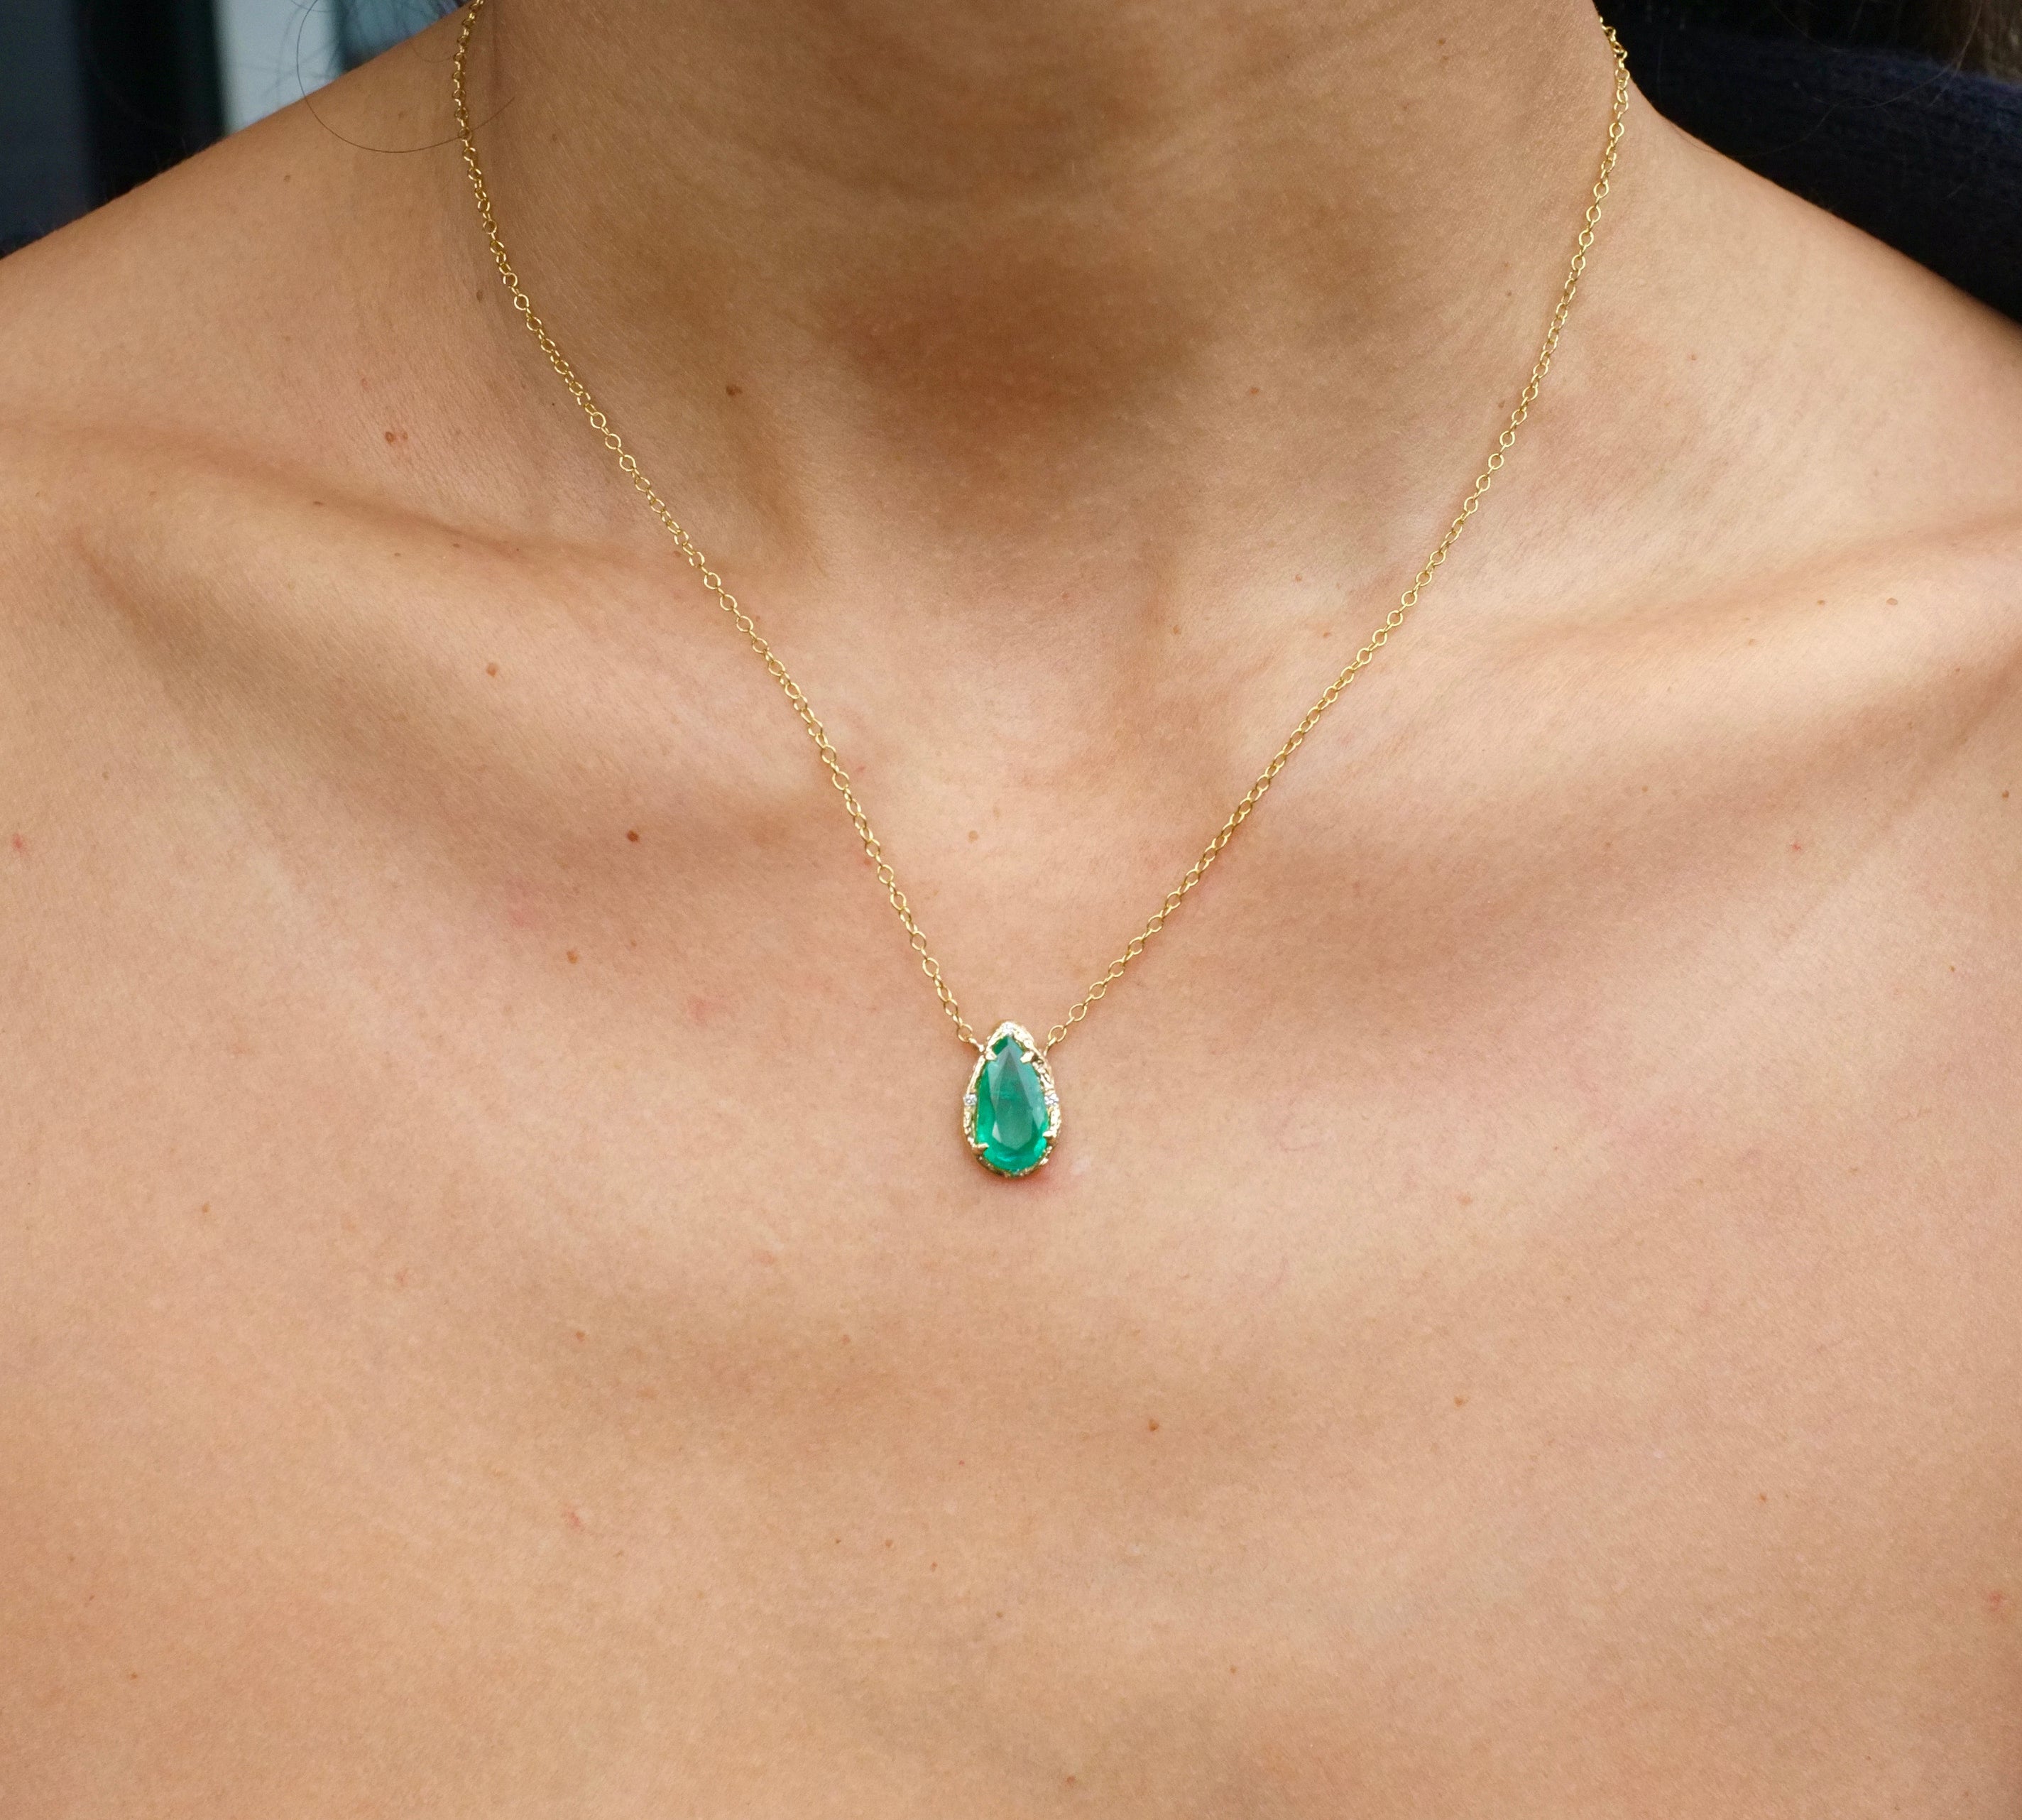 Large Emerald Pear Necklace Pendant Elisabeth Bell Jewelry   